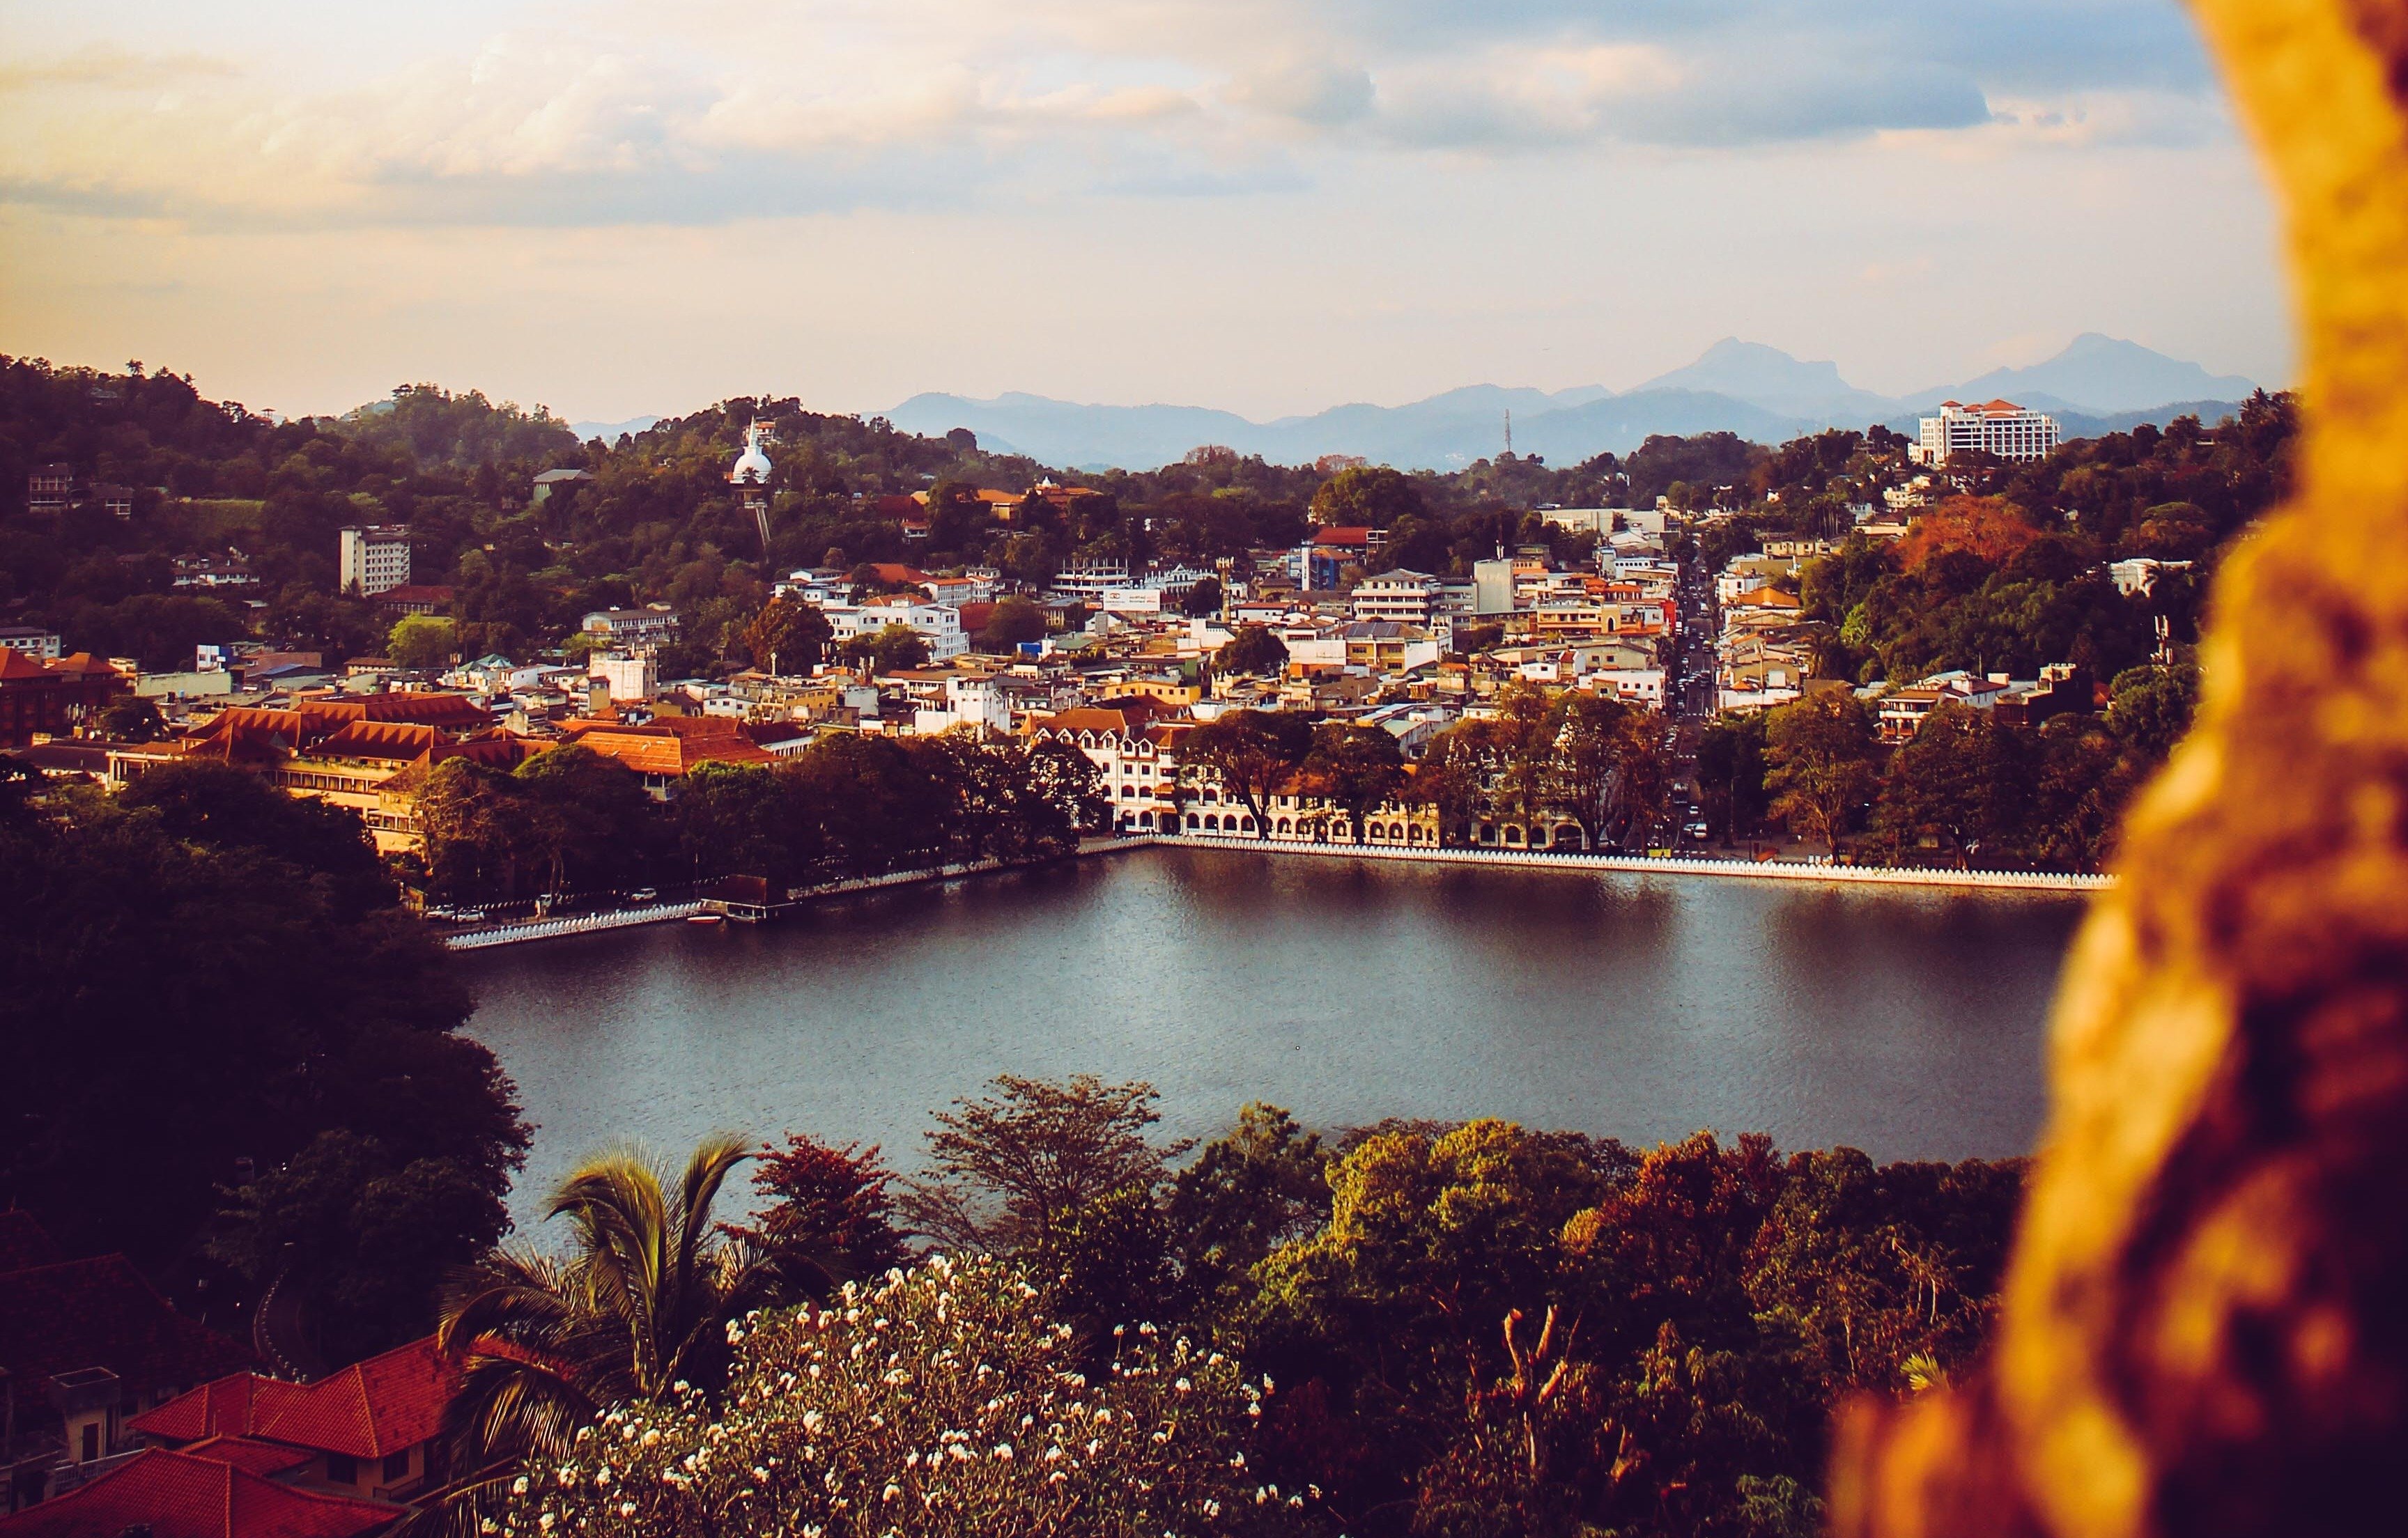 A city view of Kandy in Sri Lanka with the sea.